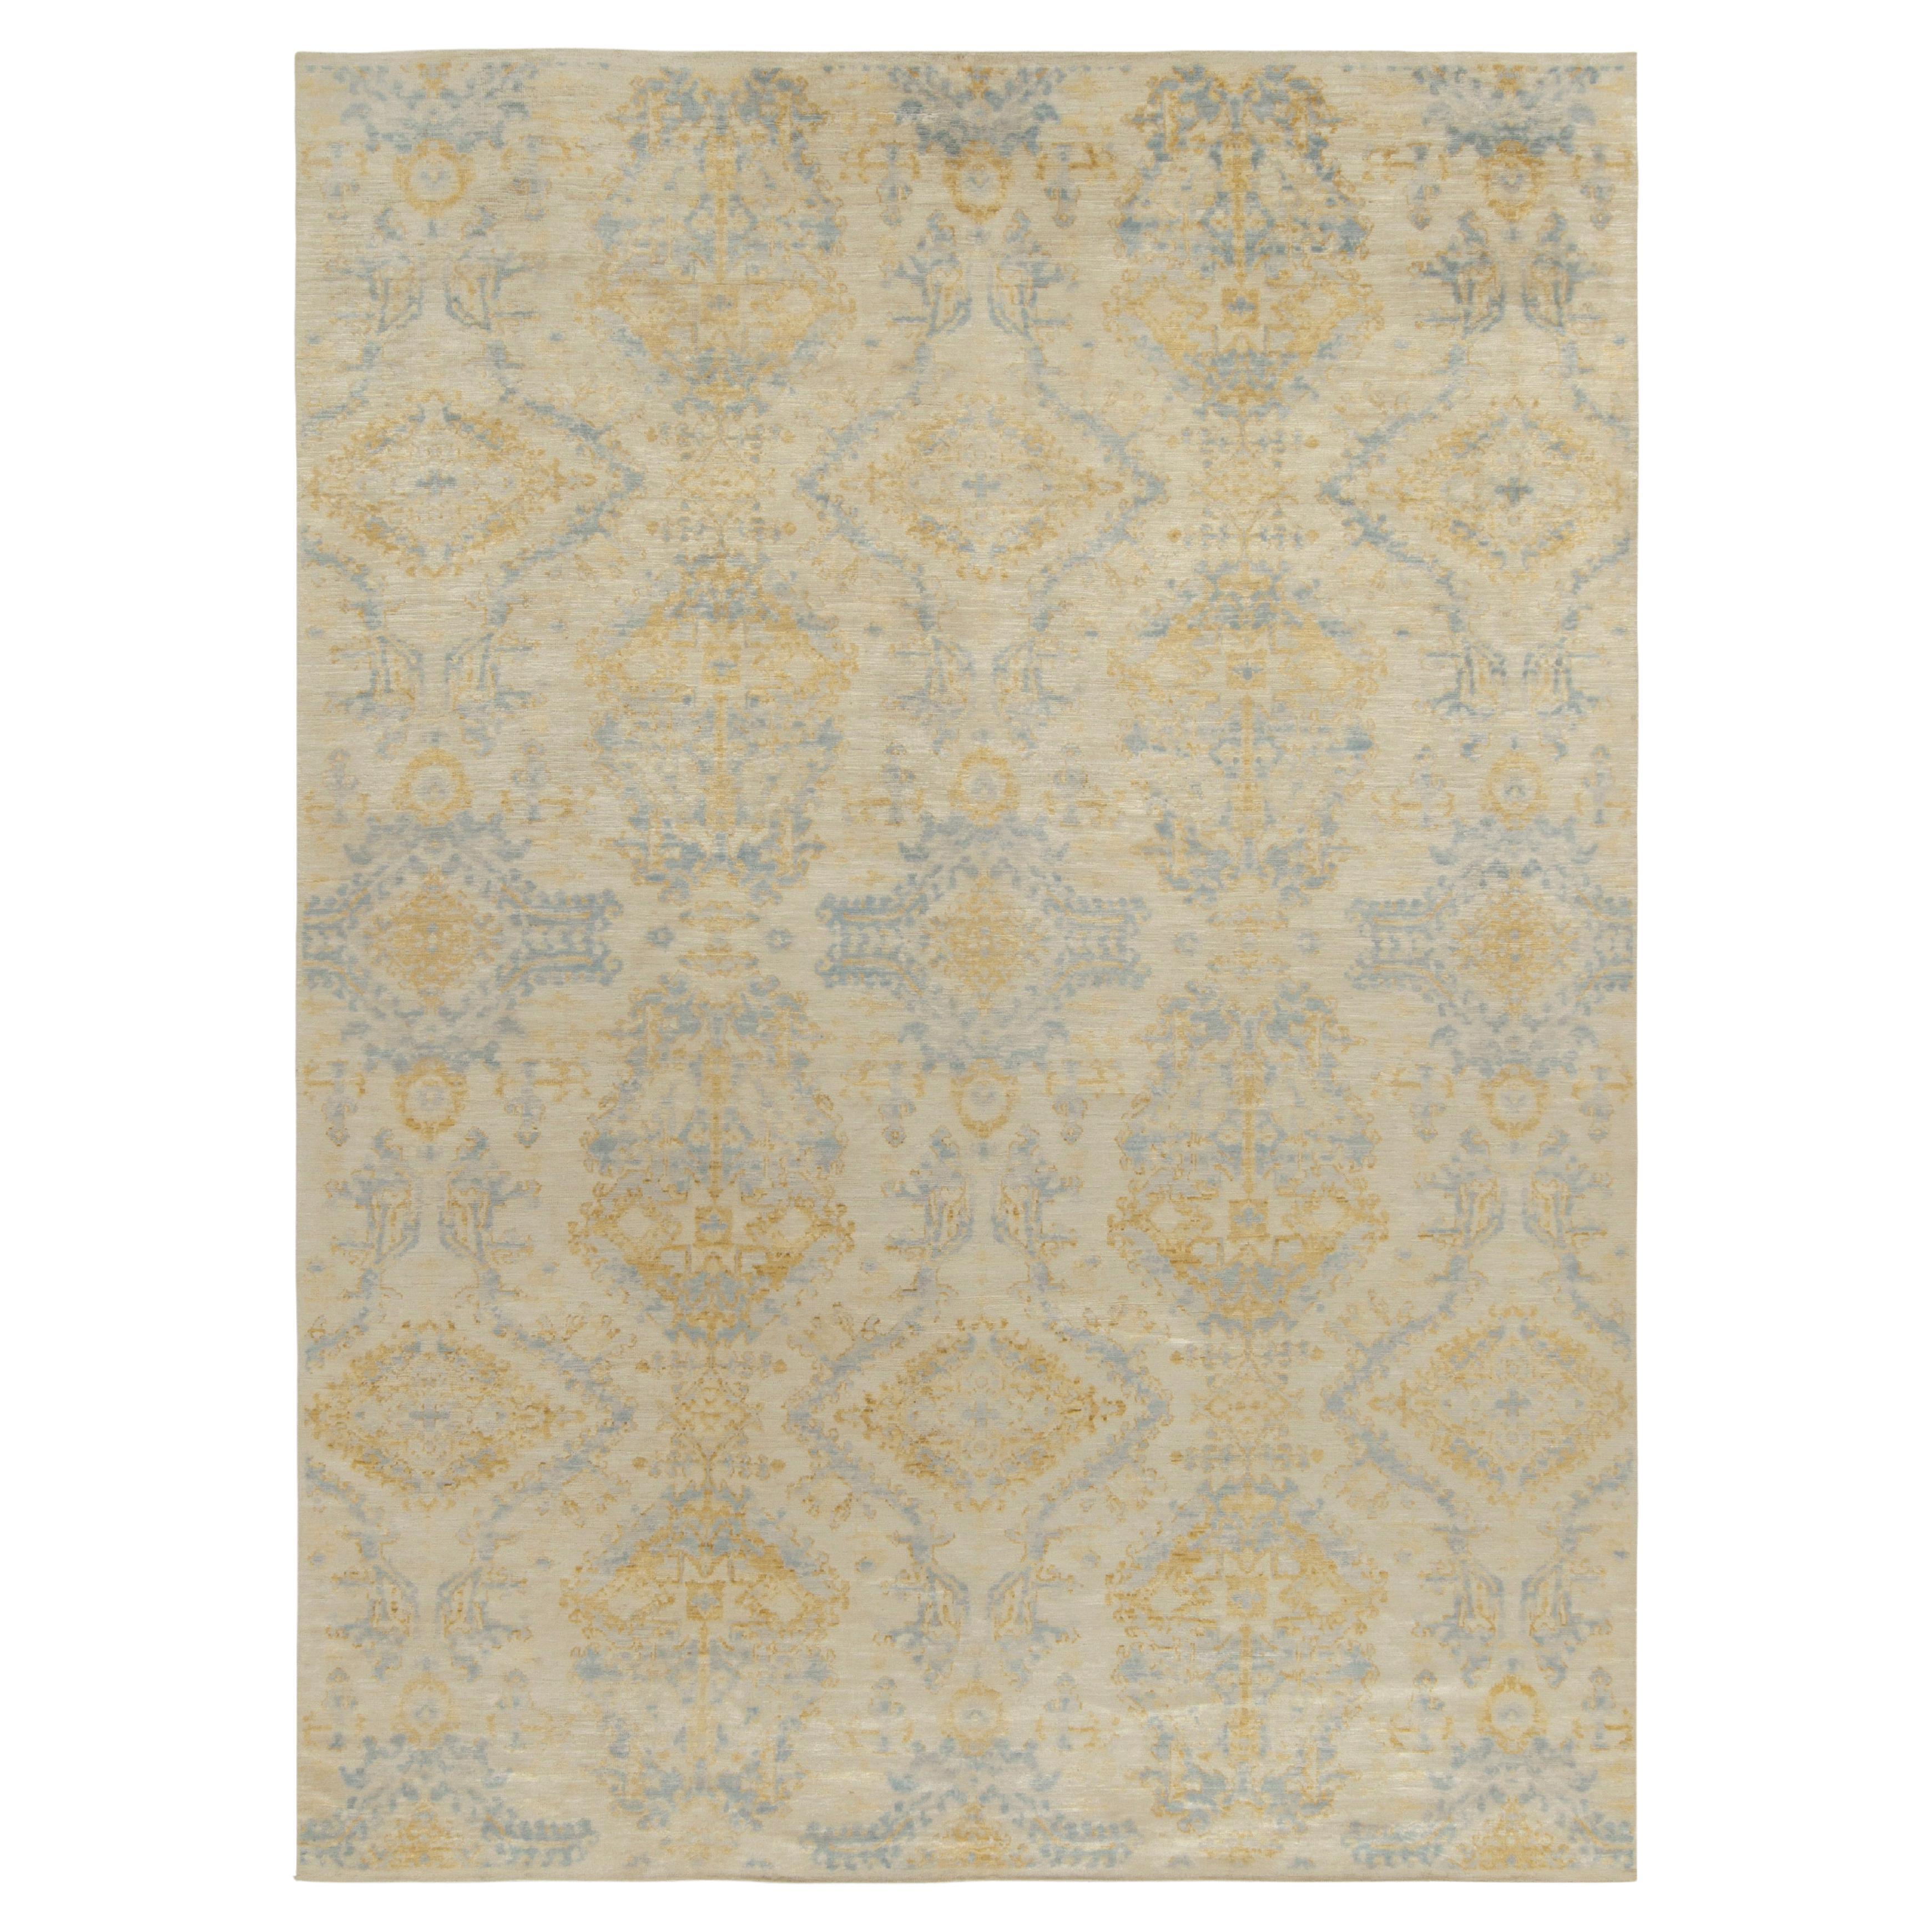 Rug & Kilim’s Contemporary Rug in Blue, Gold & Beige All over Pattern